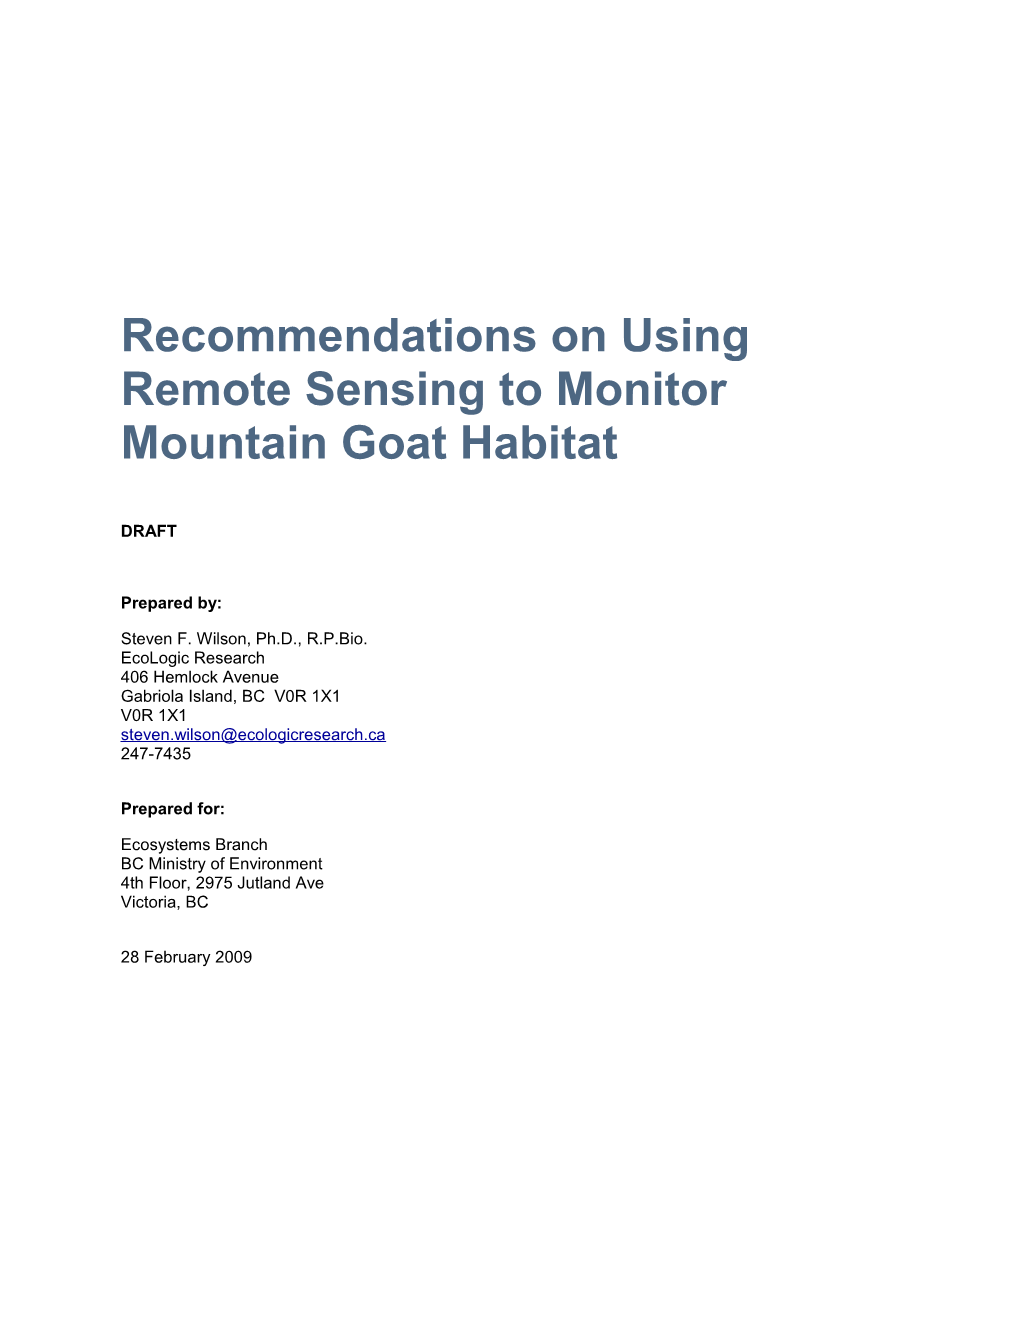 Recommendations on Using Remote Sensing to Monitor Mountain Goat Habitat